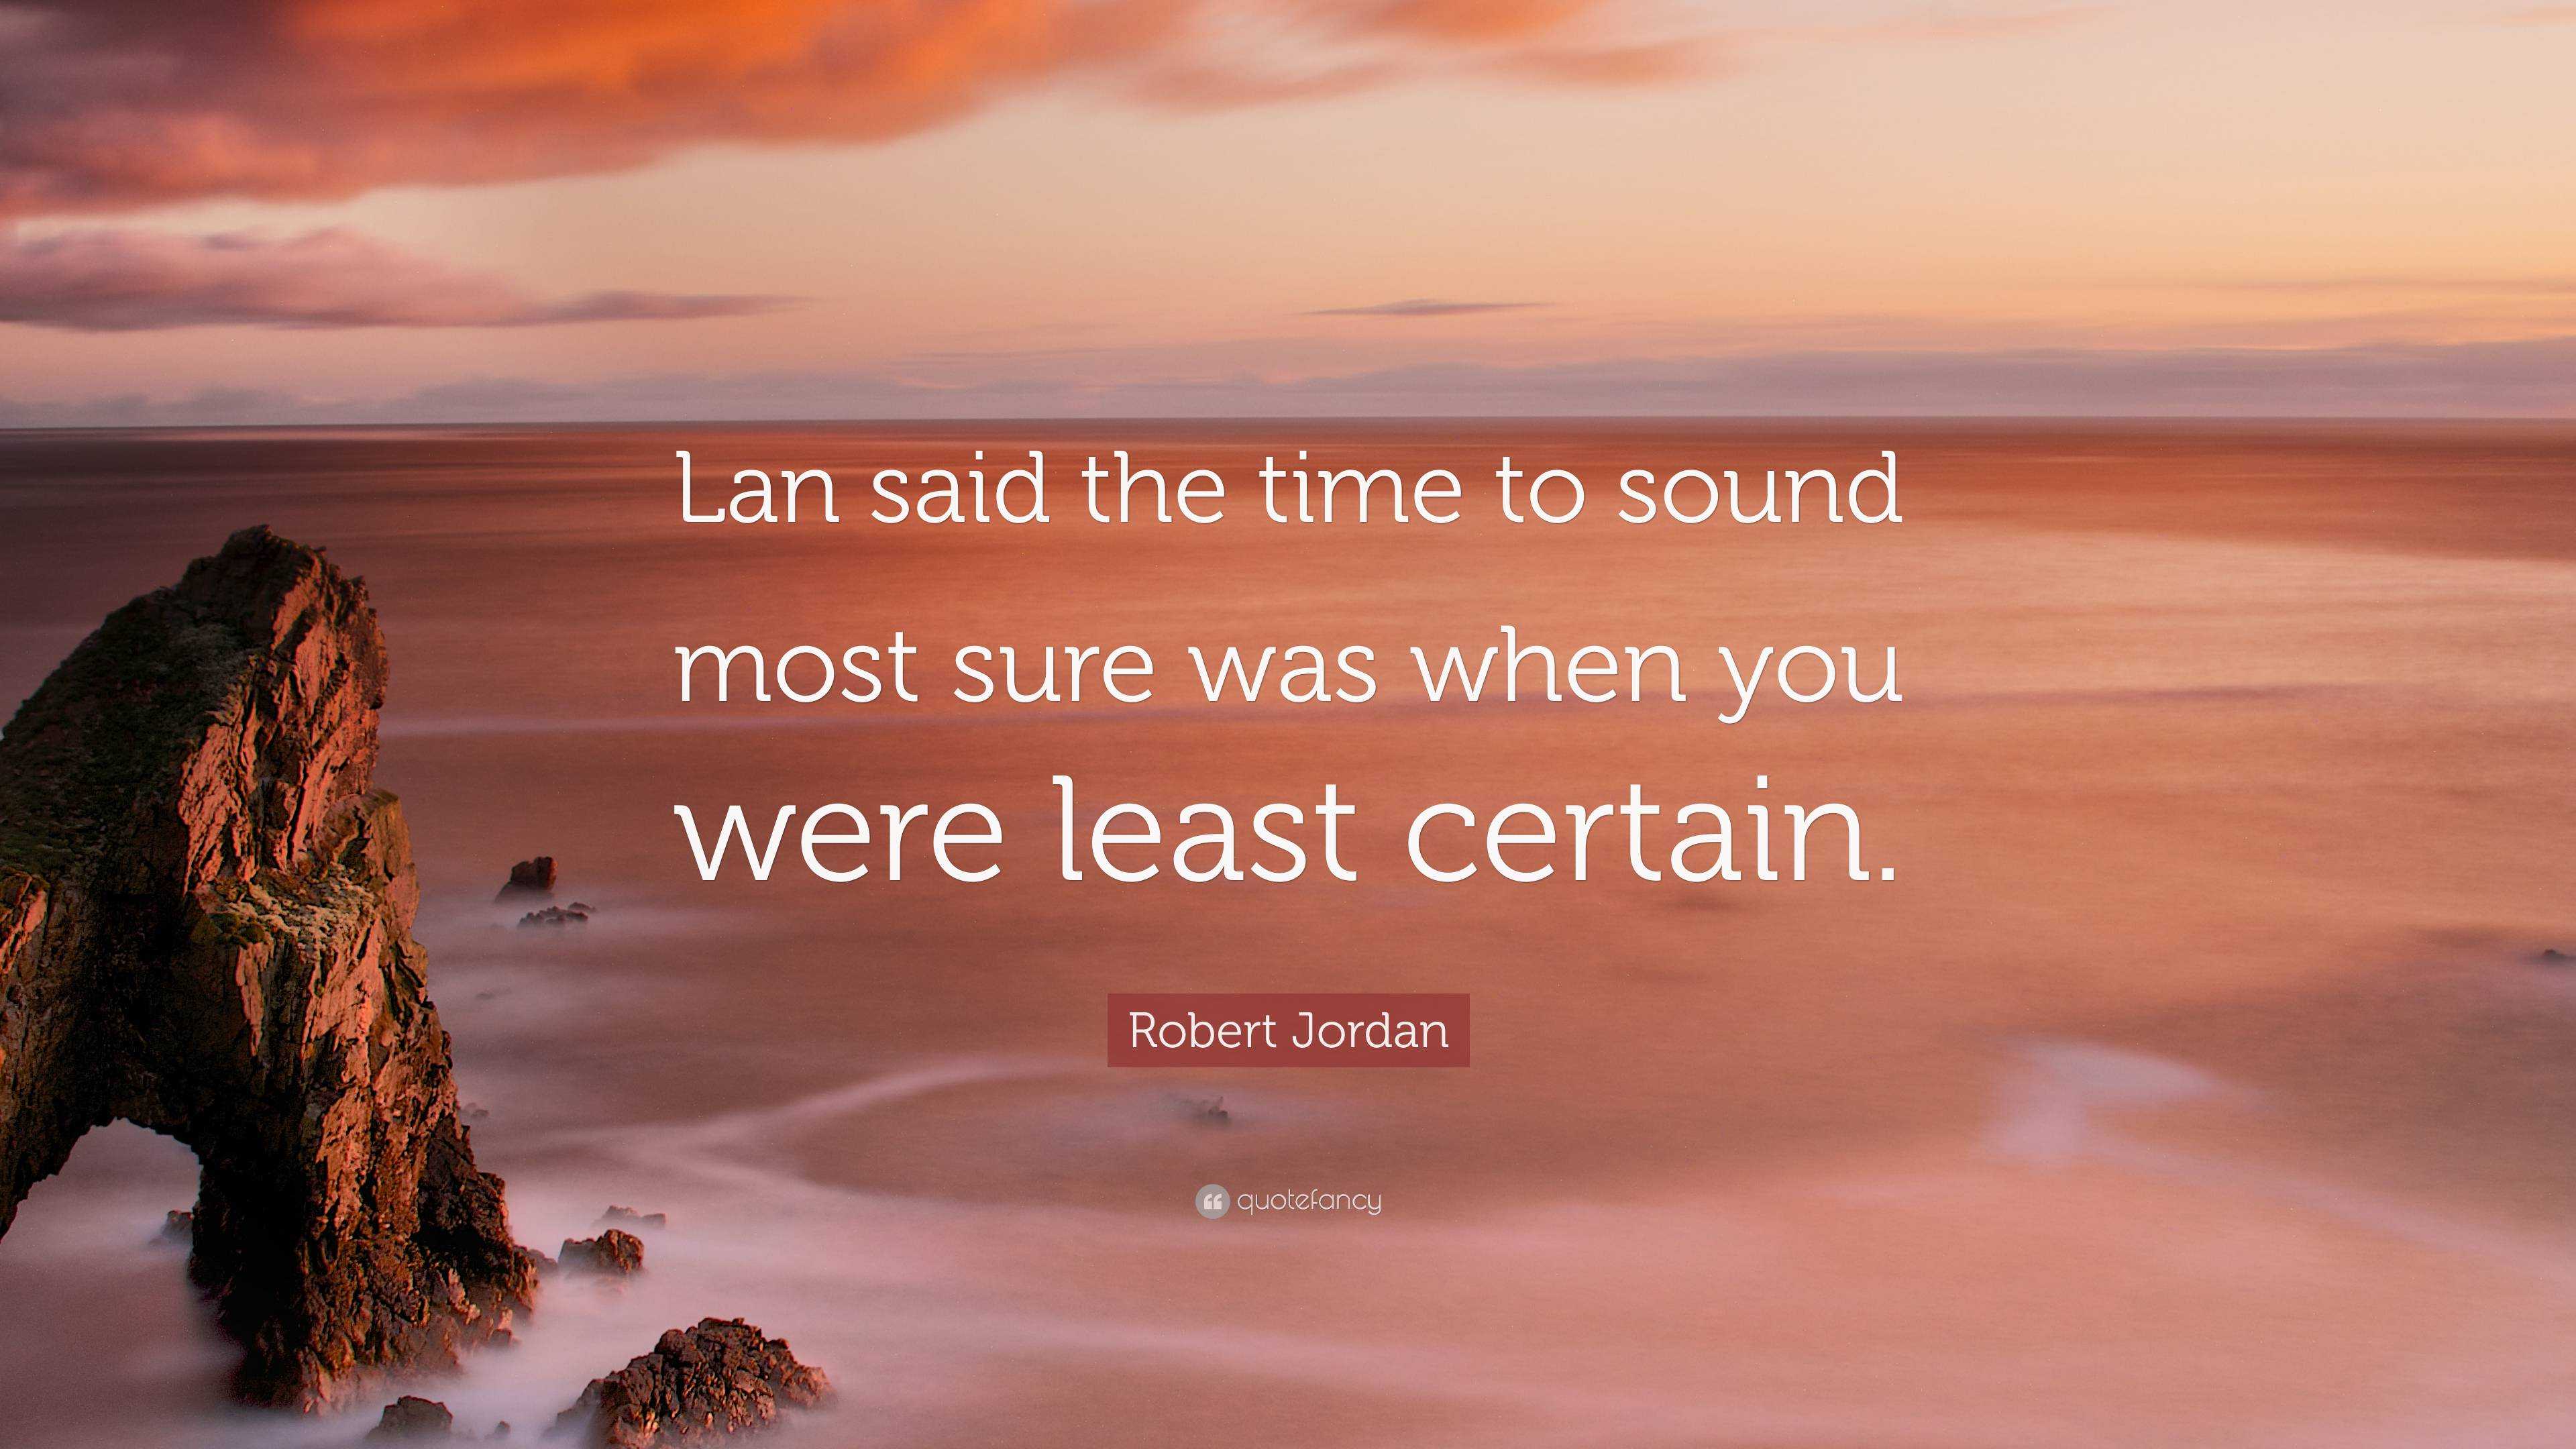 Robert Jordan Quote: “Lan said the time to sound most sure was when you ...